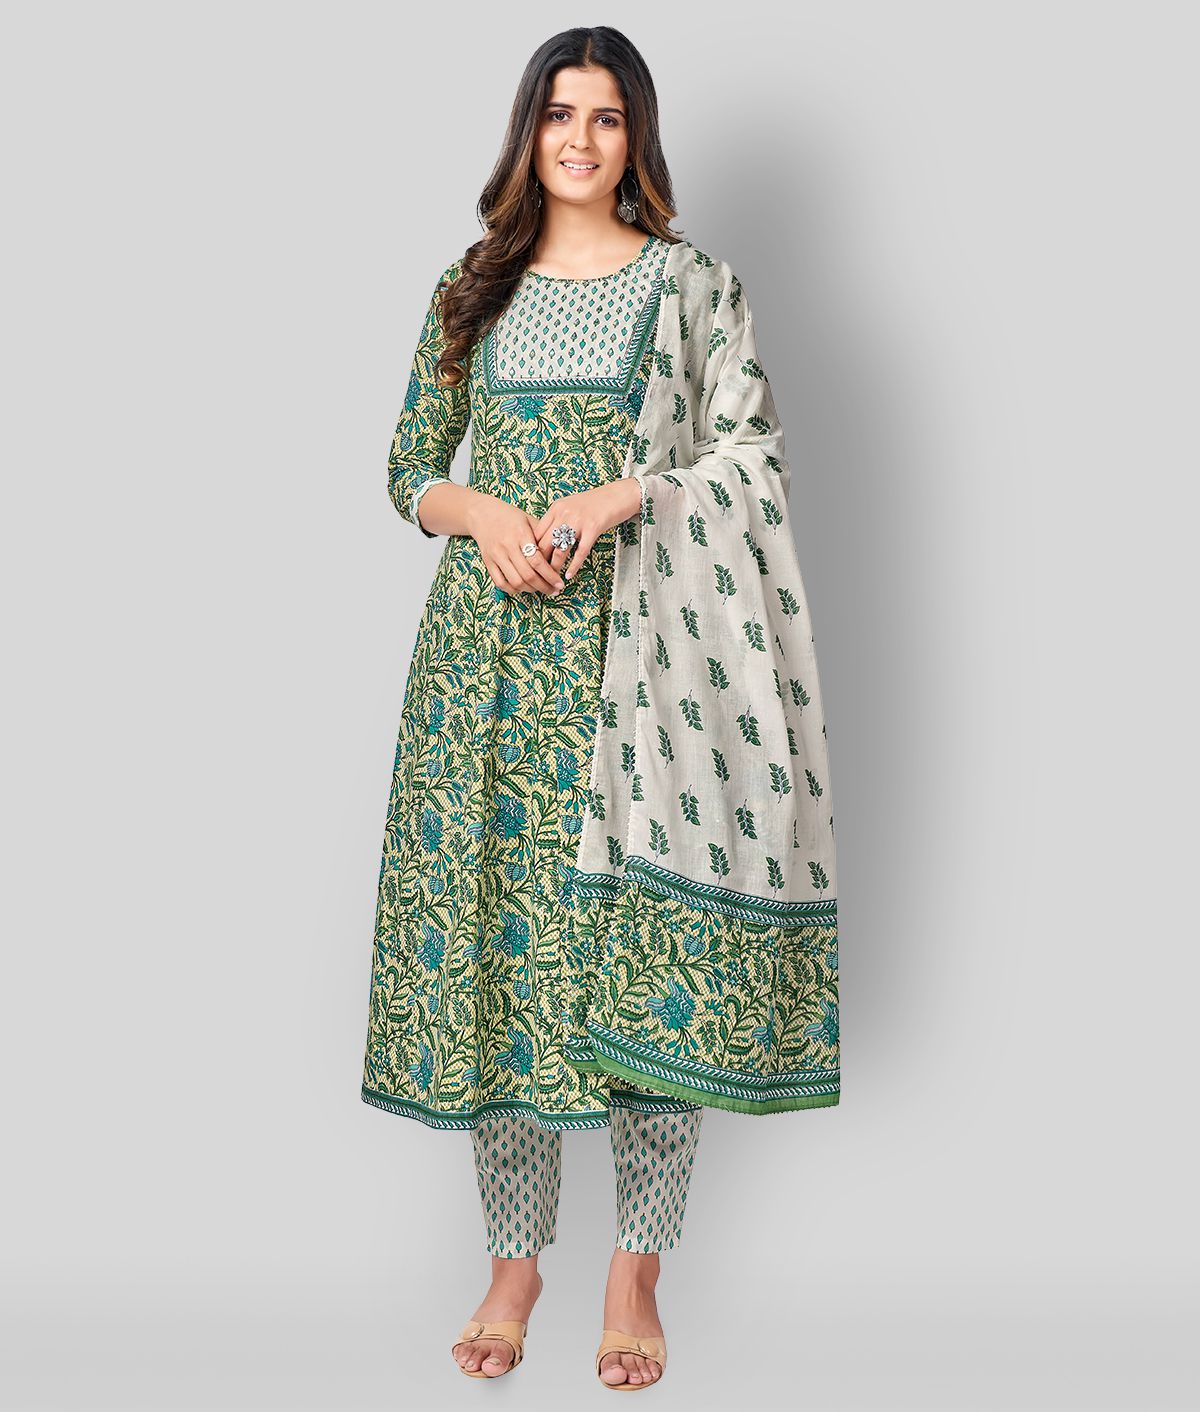     			Vbuyz - Green A-line Cotton Women's Stitched Salwar Suit ( Pack of 1 )